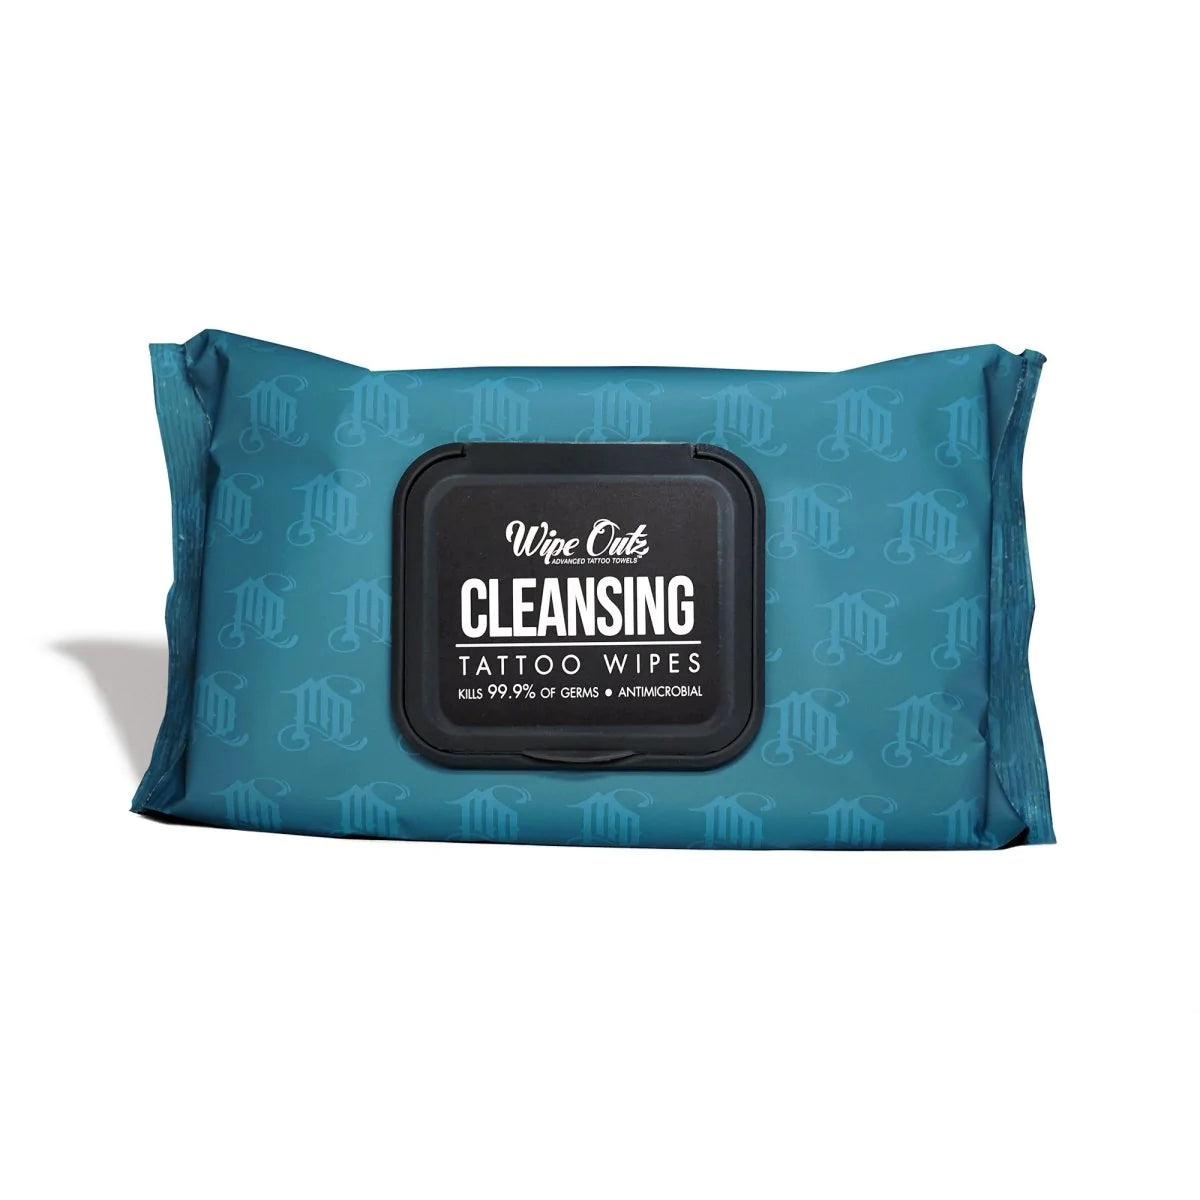 MD Wipe Outz™ New Cleansing Tattoo Wipes - 40 Pack